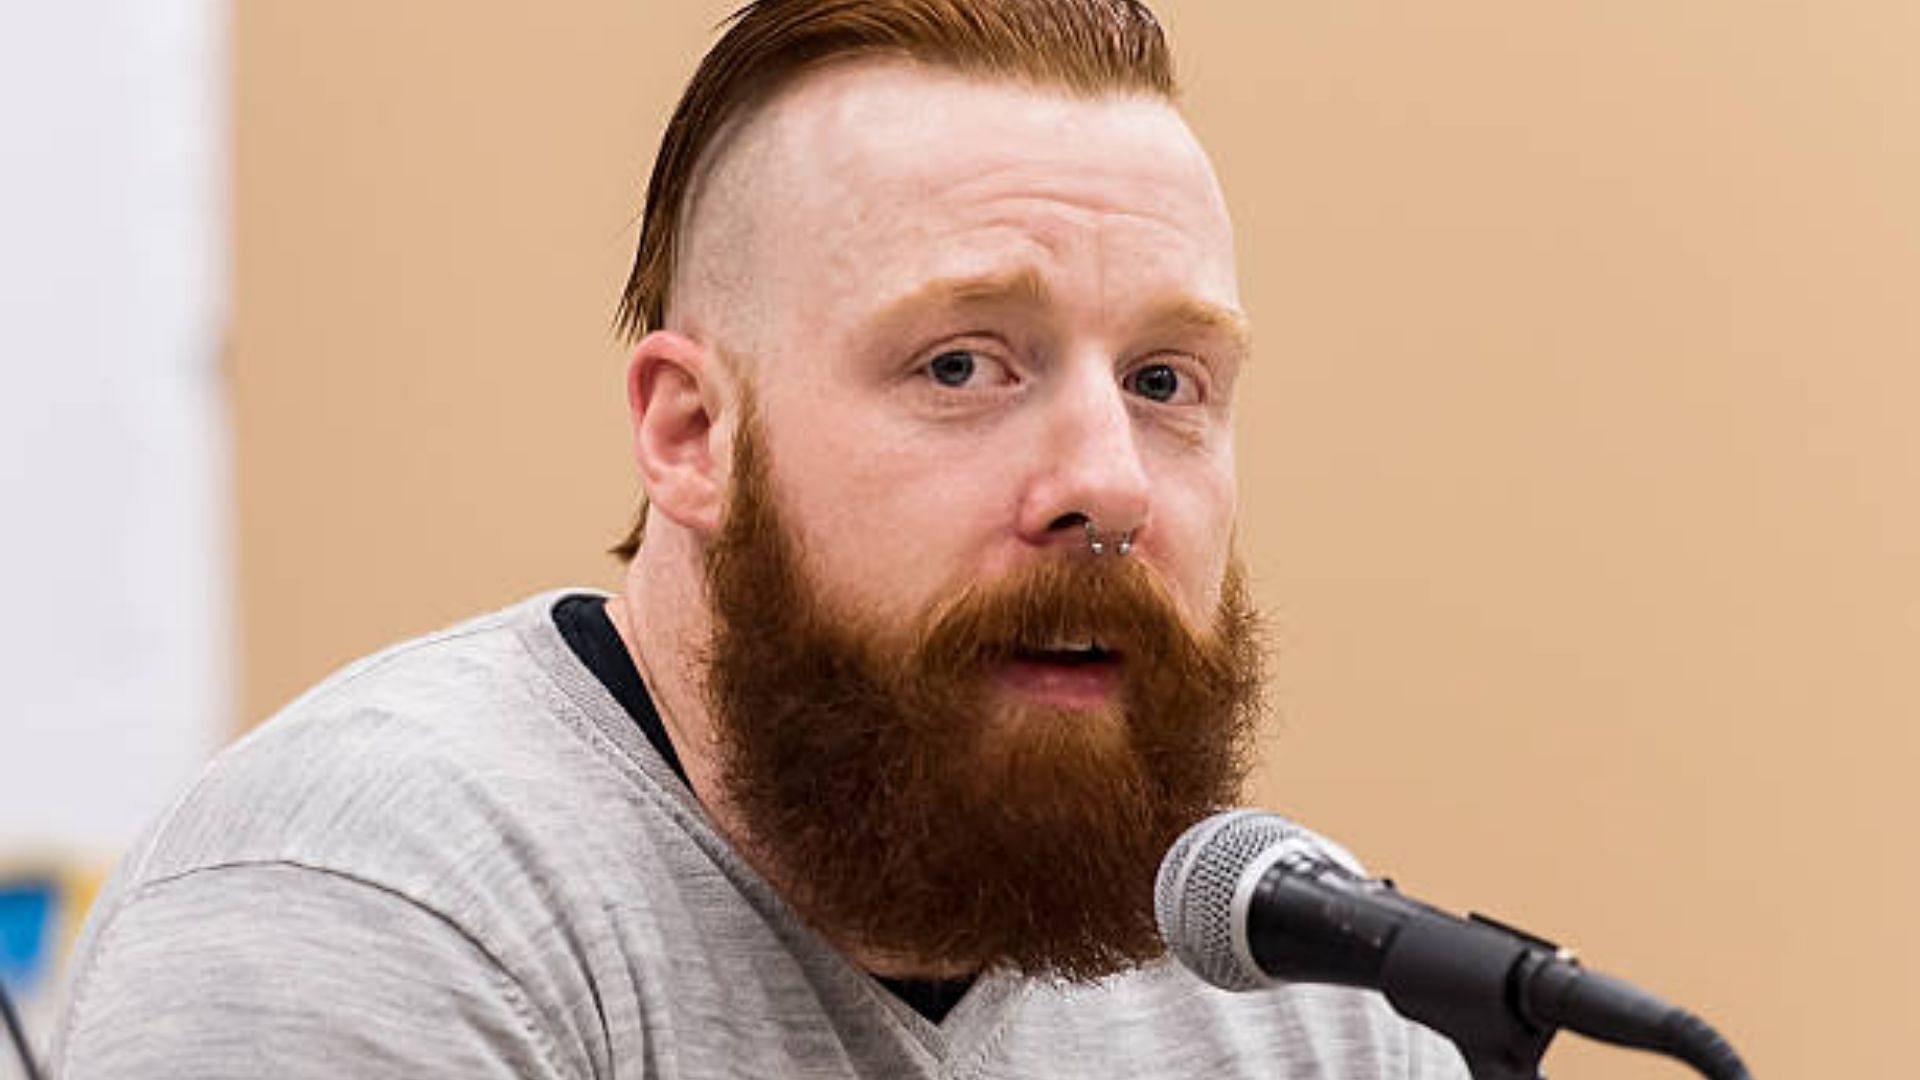 Sheamus reflects on competing in the WWE main roster